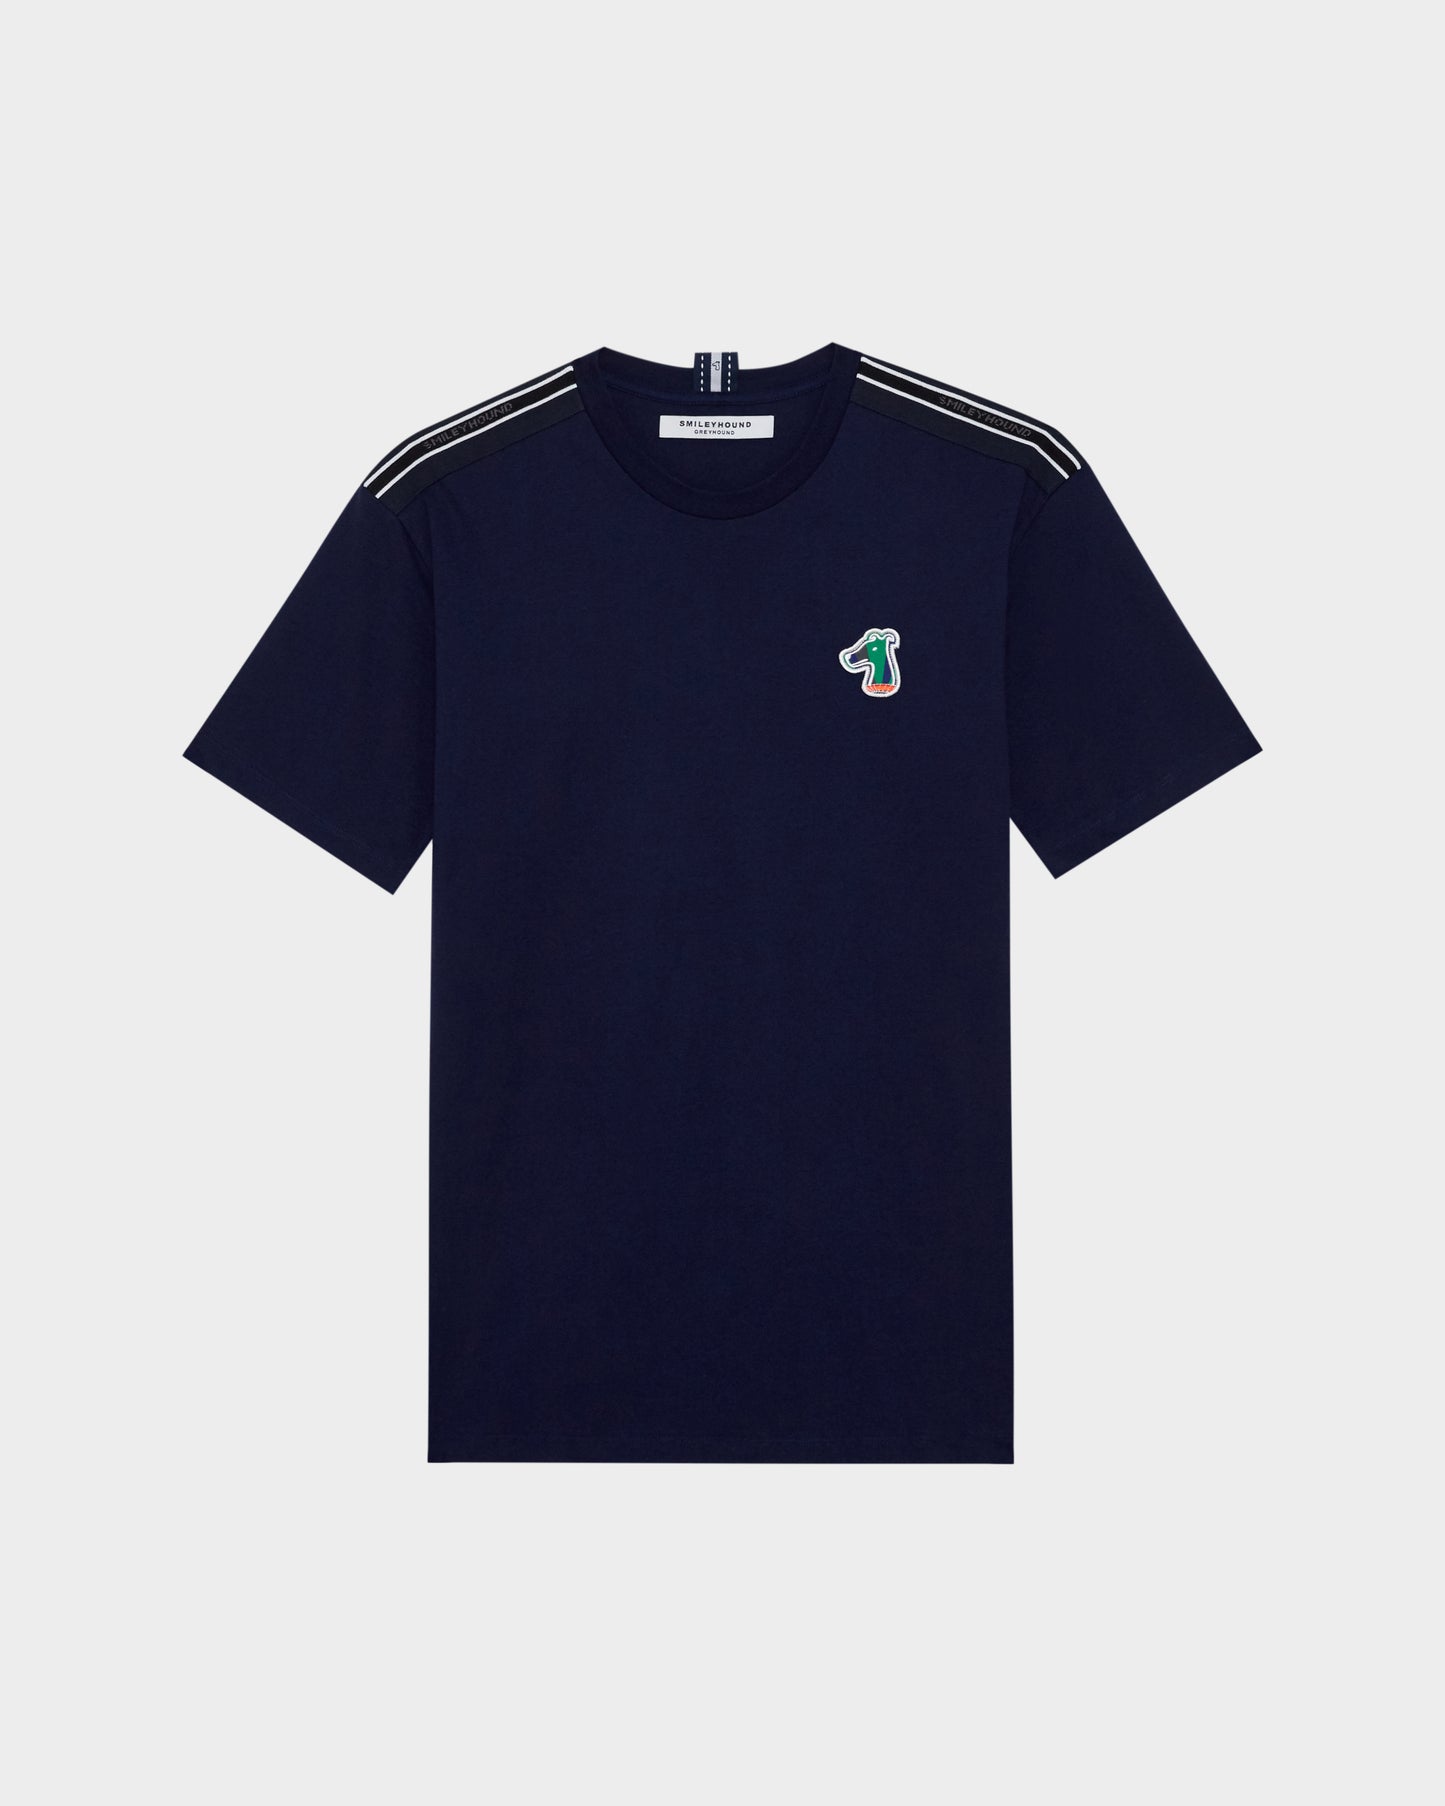 TAPE T-SHIRT WITH LOGO EMBROIDERED